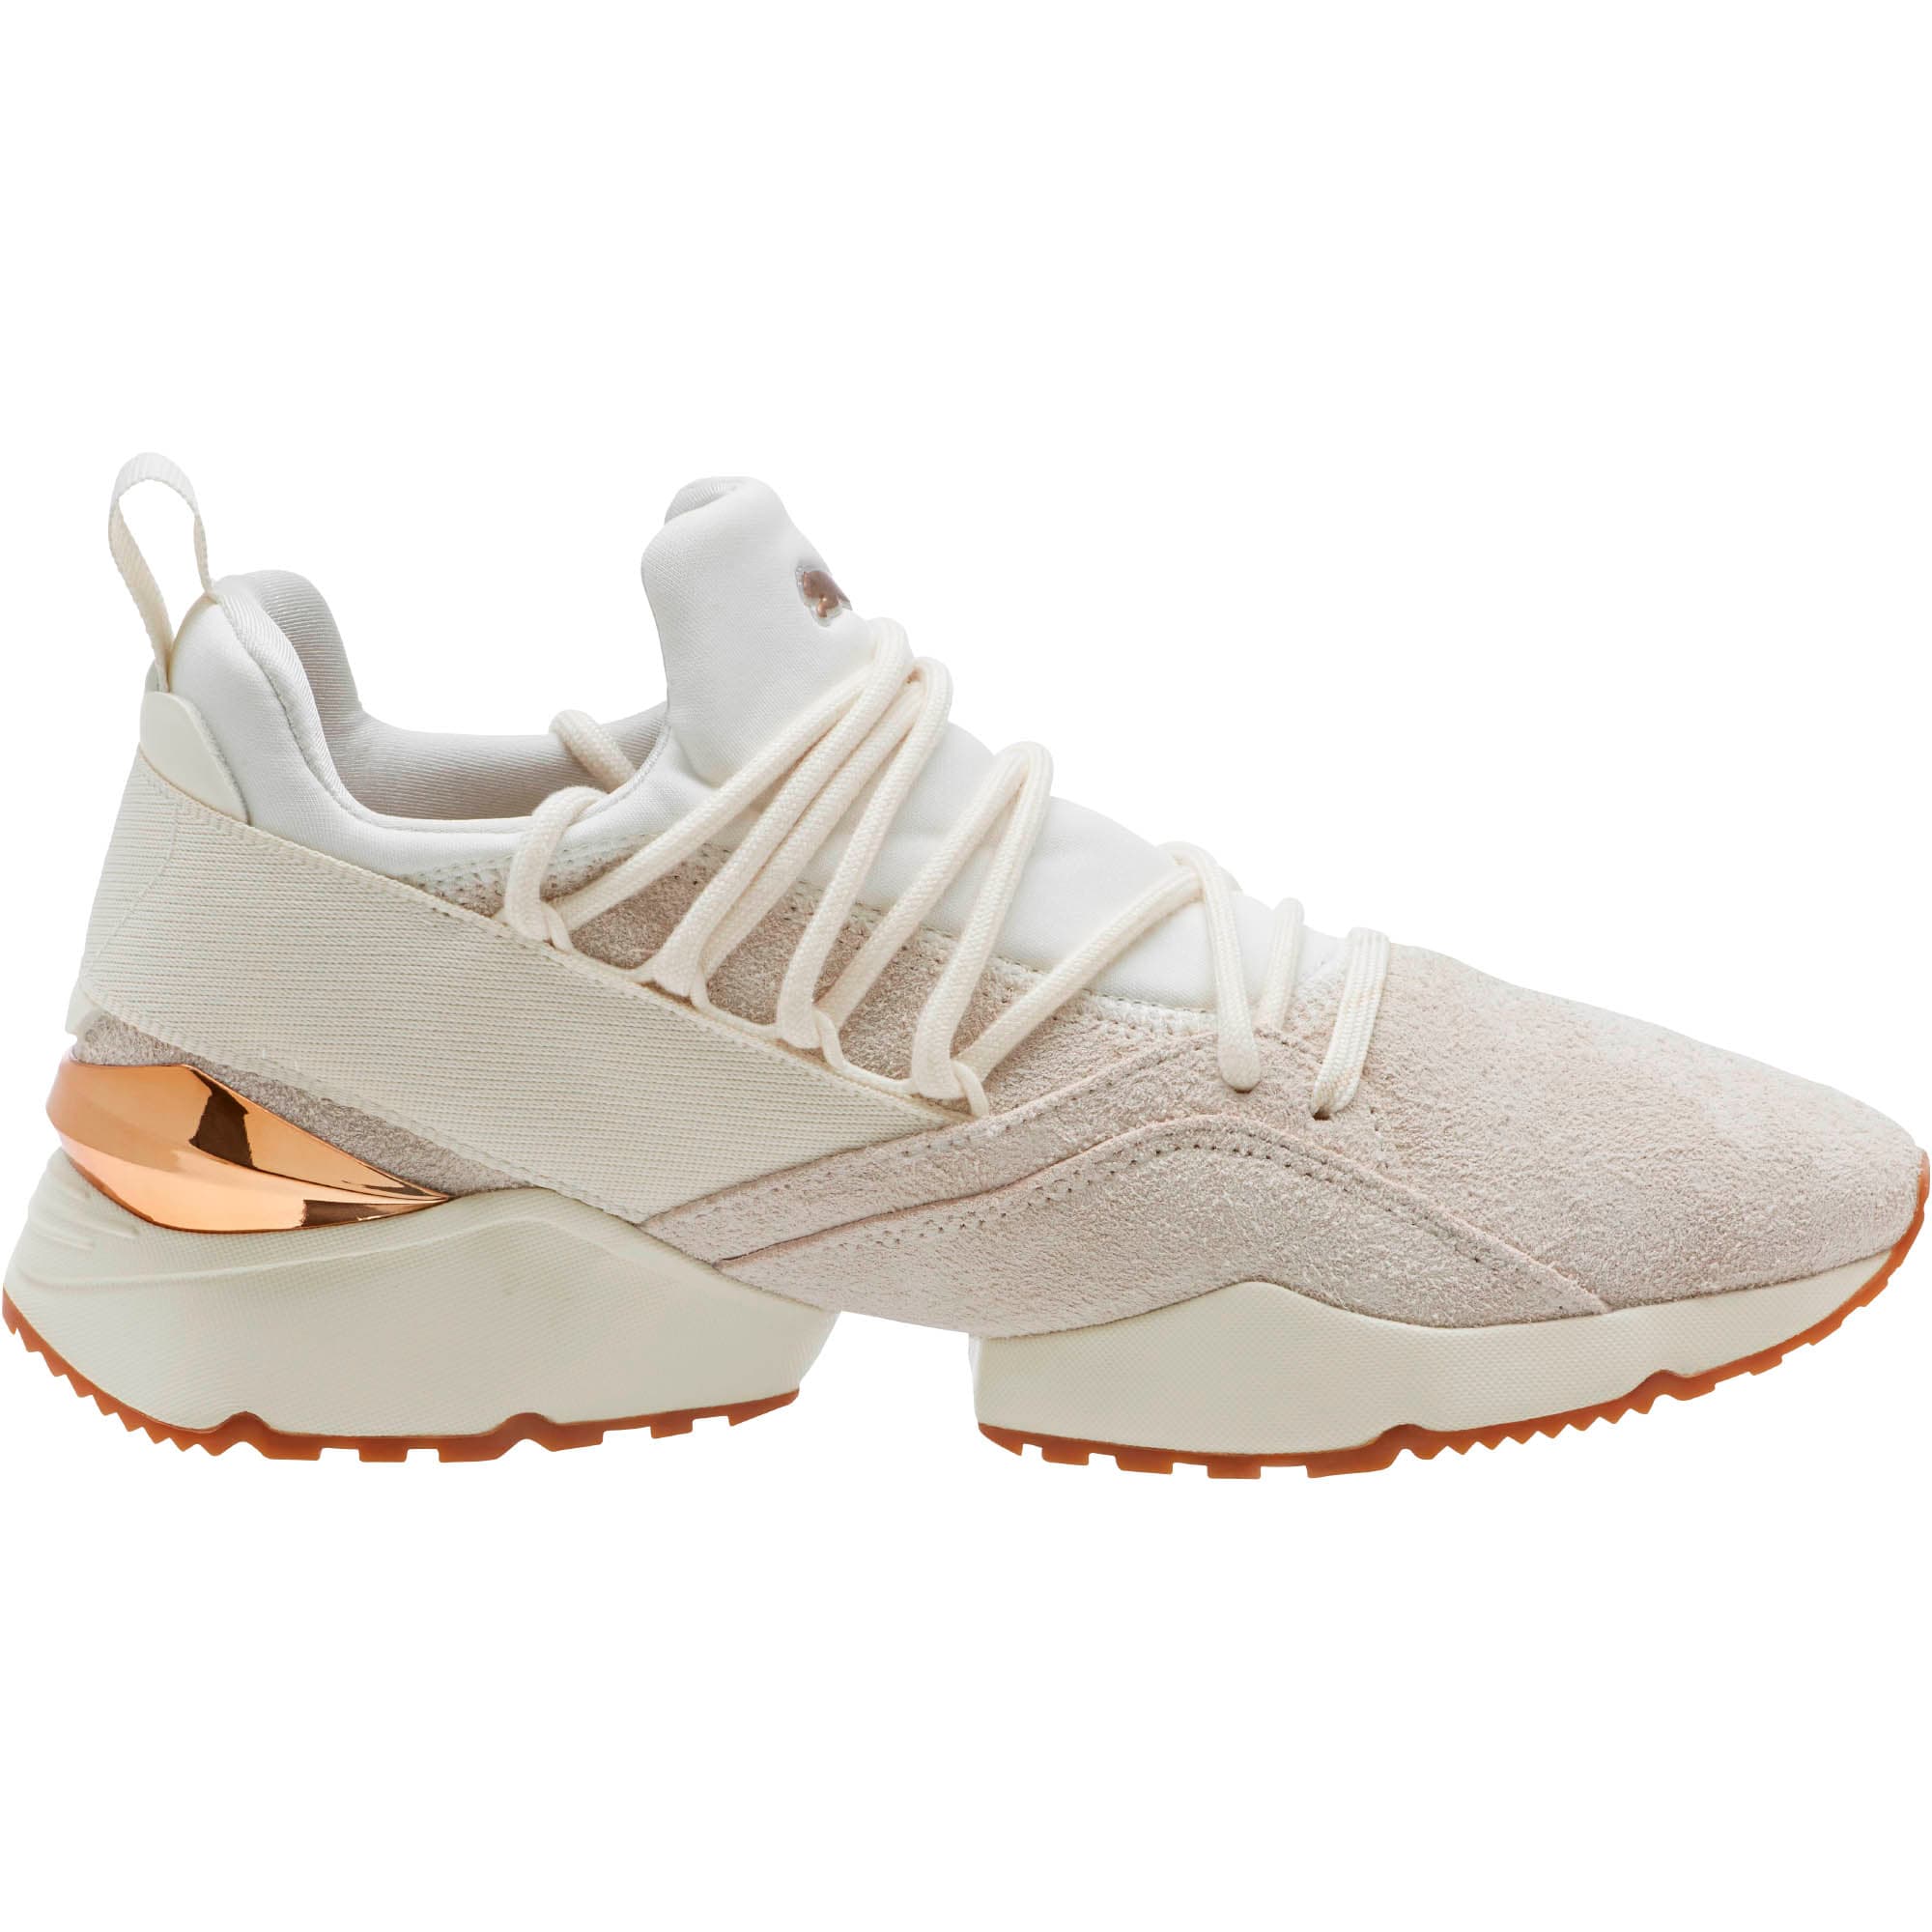 Muse Maia Util Women's Sneakers | PUMA US